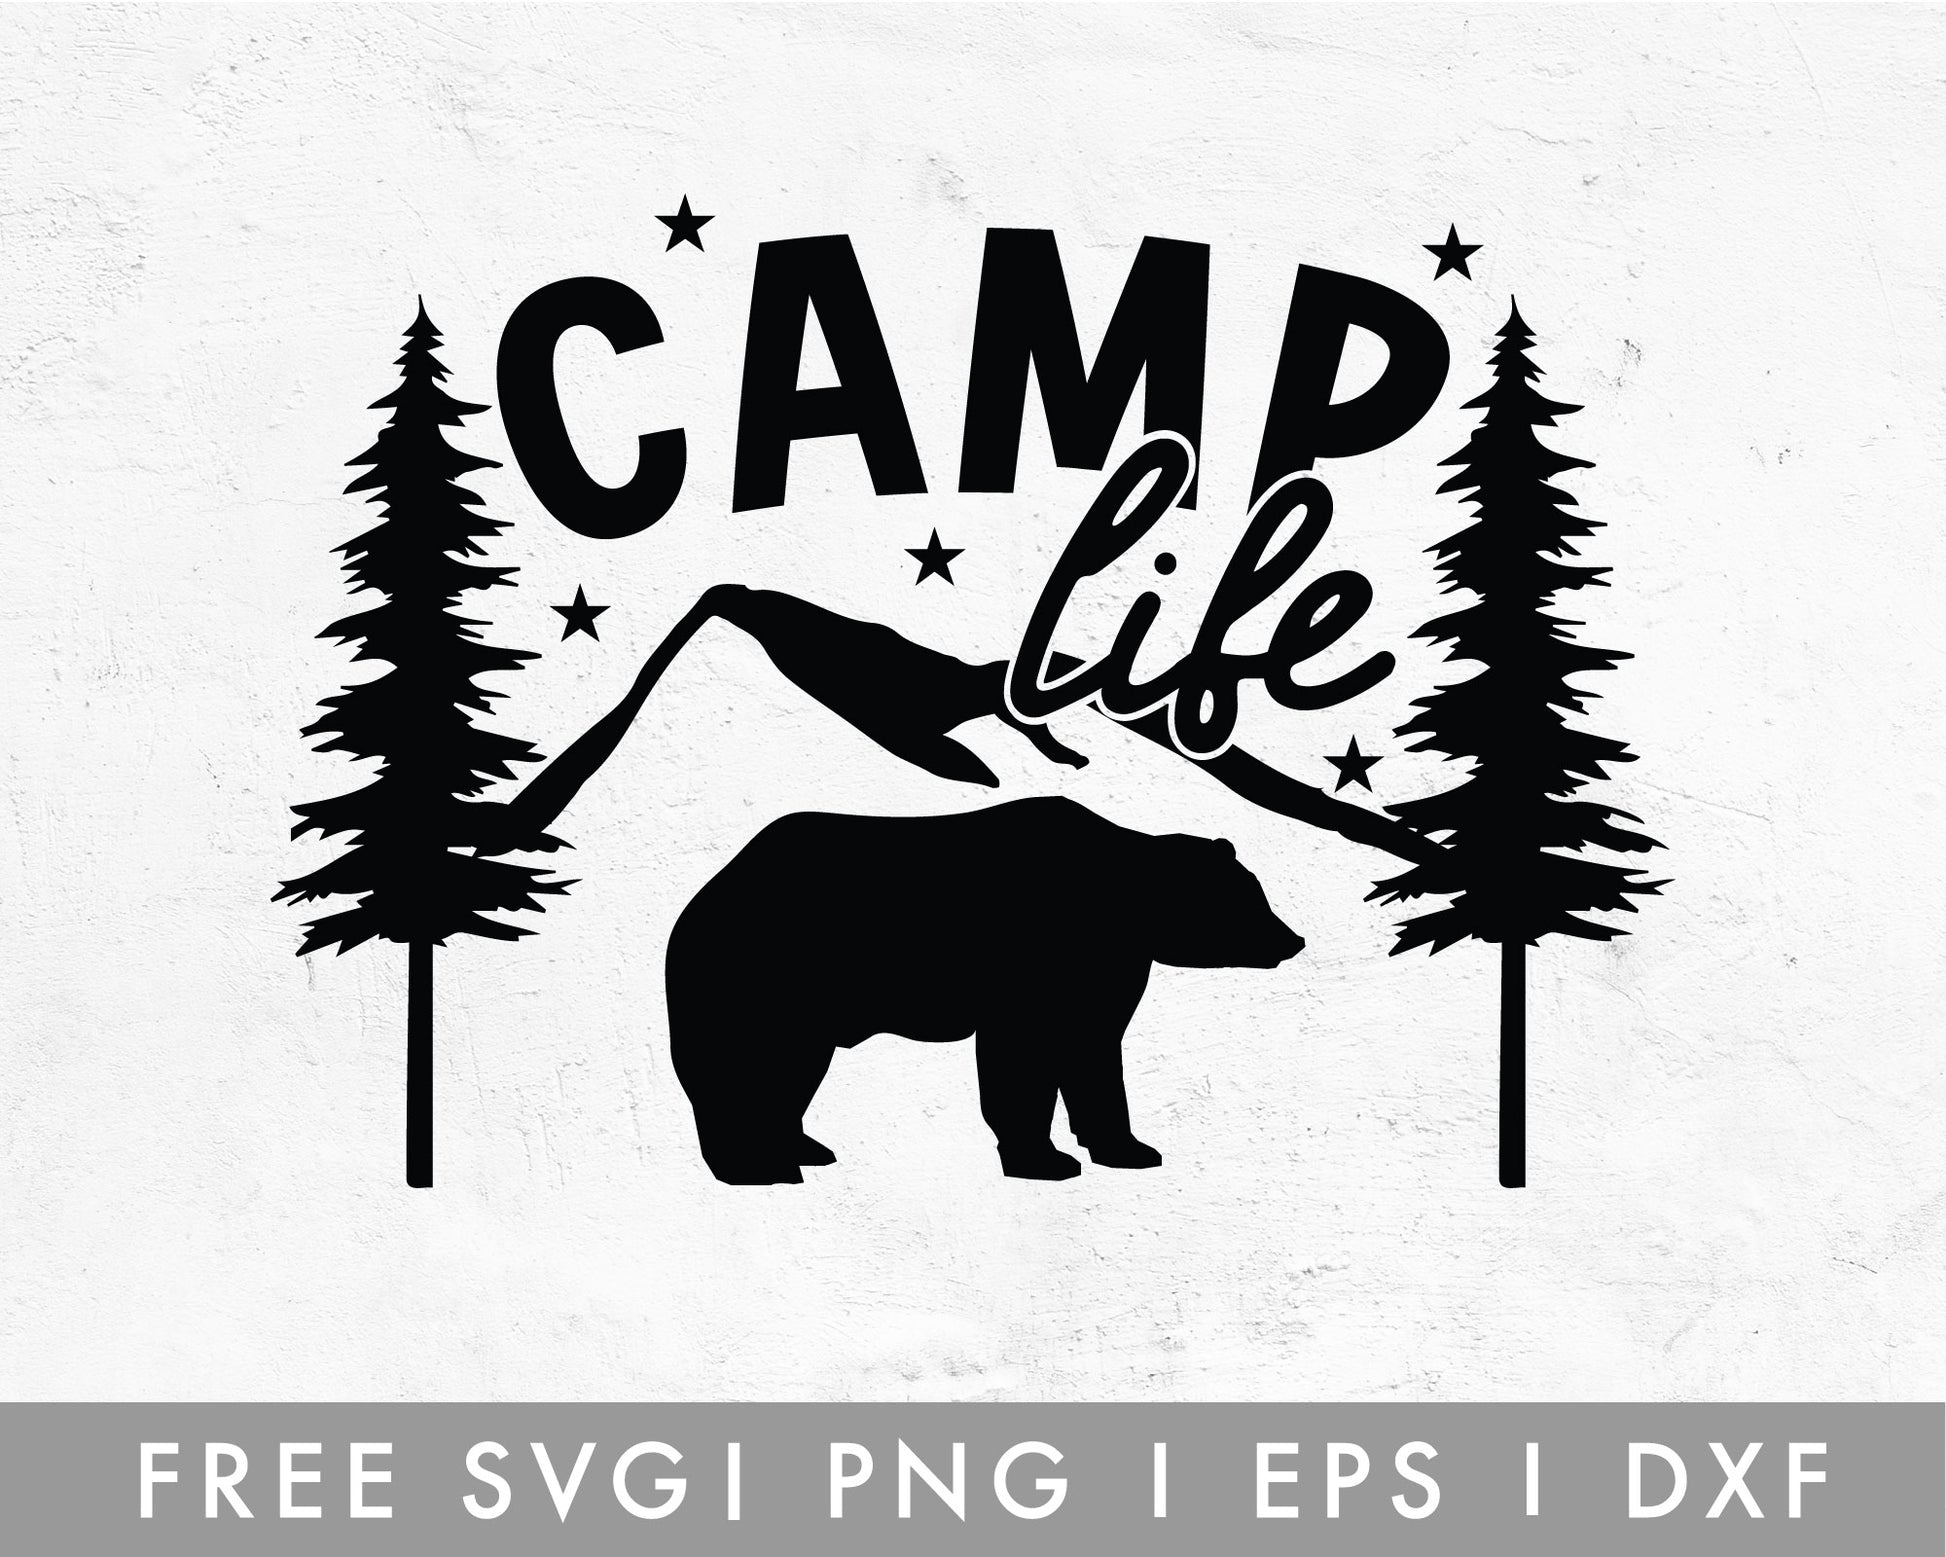 FREE Camping SVG | Camp Life SVG Cut File for Cricut, Cameo Silhouette | Free SVG Cut File